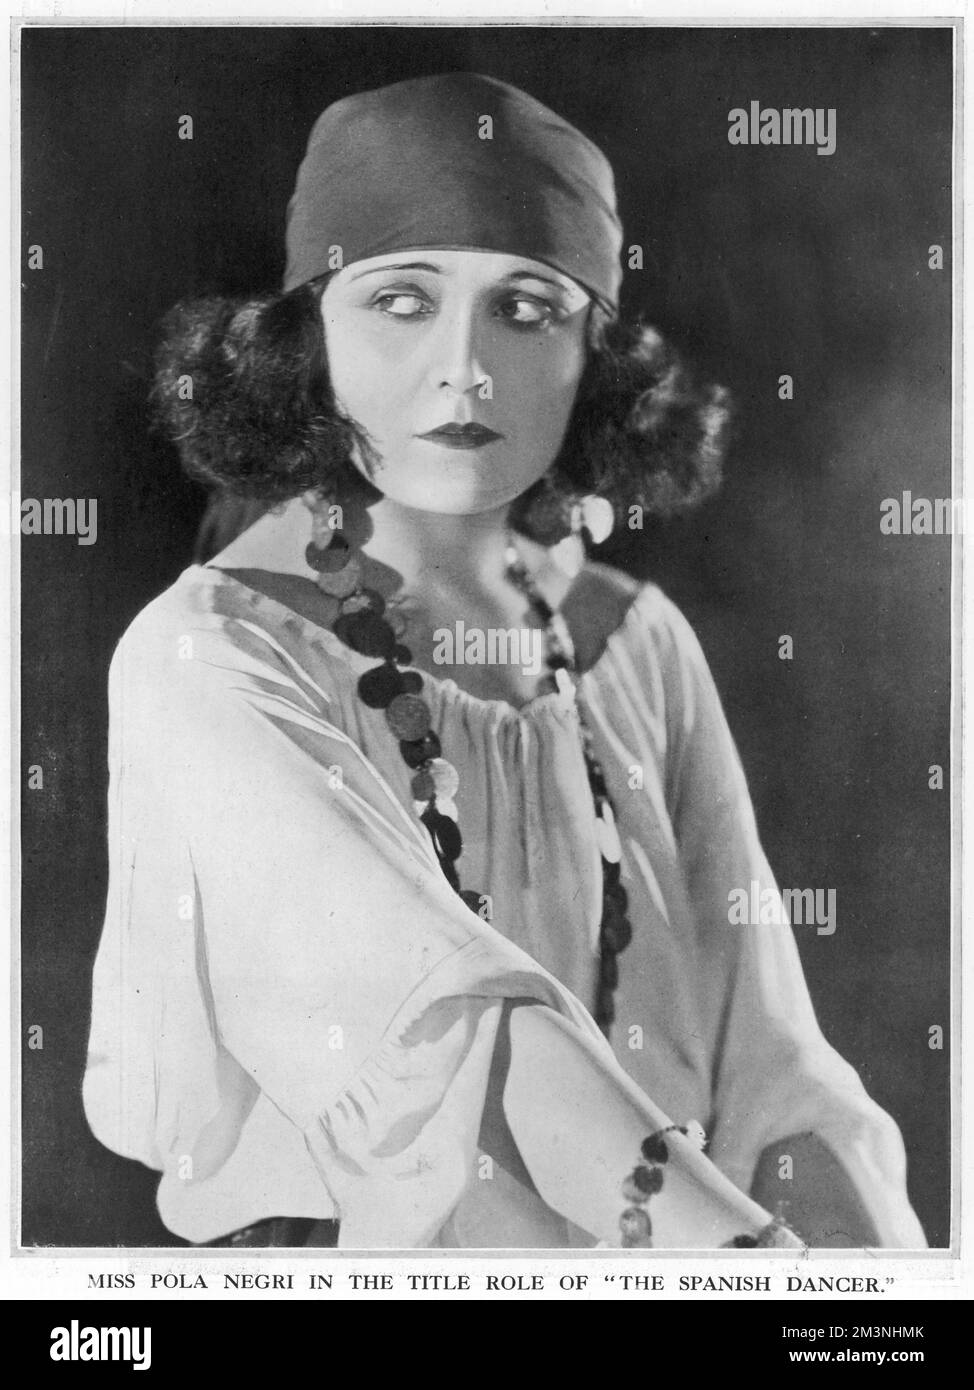 POLA NEGRI  (Barbara Apolonia Chalupiec) in 1924, Polish film actress who specialised in femme fatale roles in silent films.  Seen here in the title role of 'The Spanish Dancer', a dancing girl and gypsy fortune teller who charmed a king.    1897 - 1987 Stock Photo